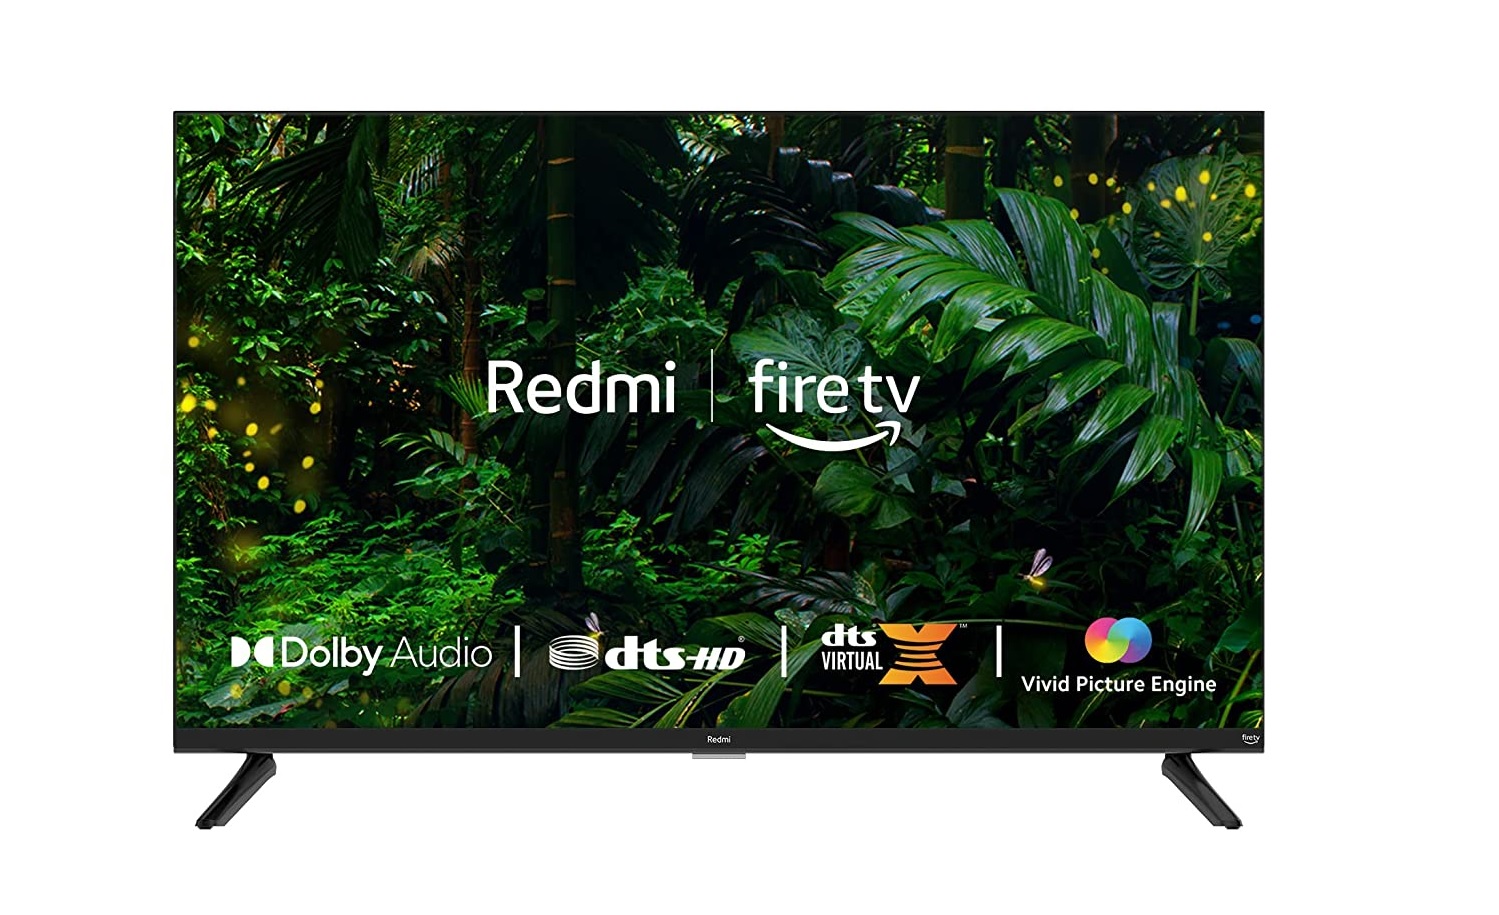 Buy Redmi 80 cm (32 inches) HD Ready Smart LED Fire TV At Rs 10999 From Amazon [Launch Price Rs 12999]